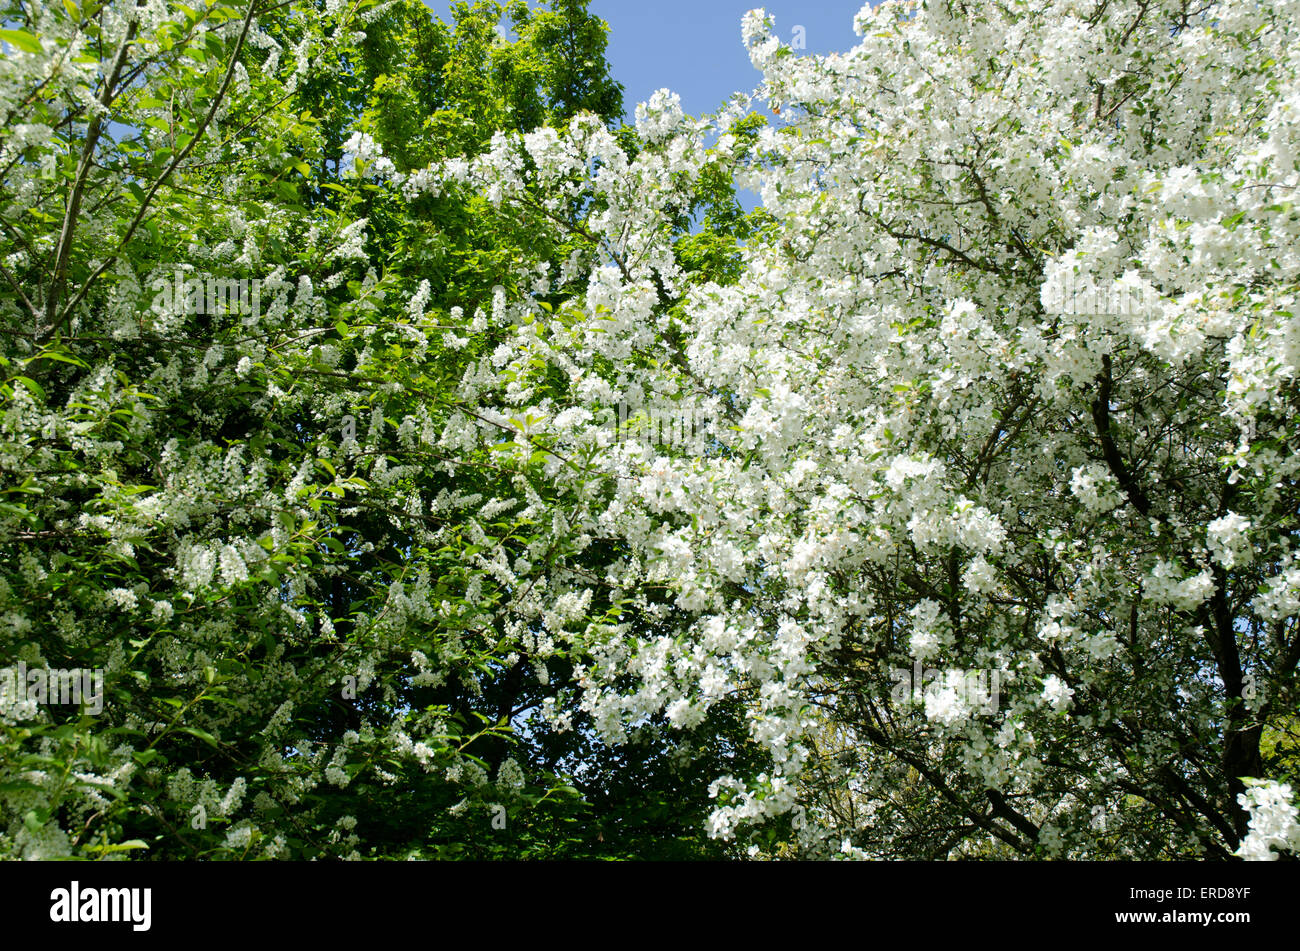 Summer white blossom on trees with a blue sky Stock Photo